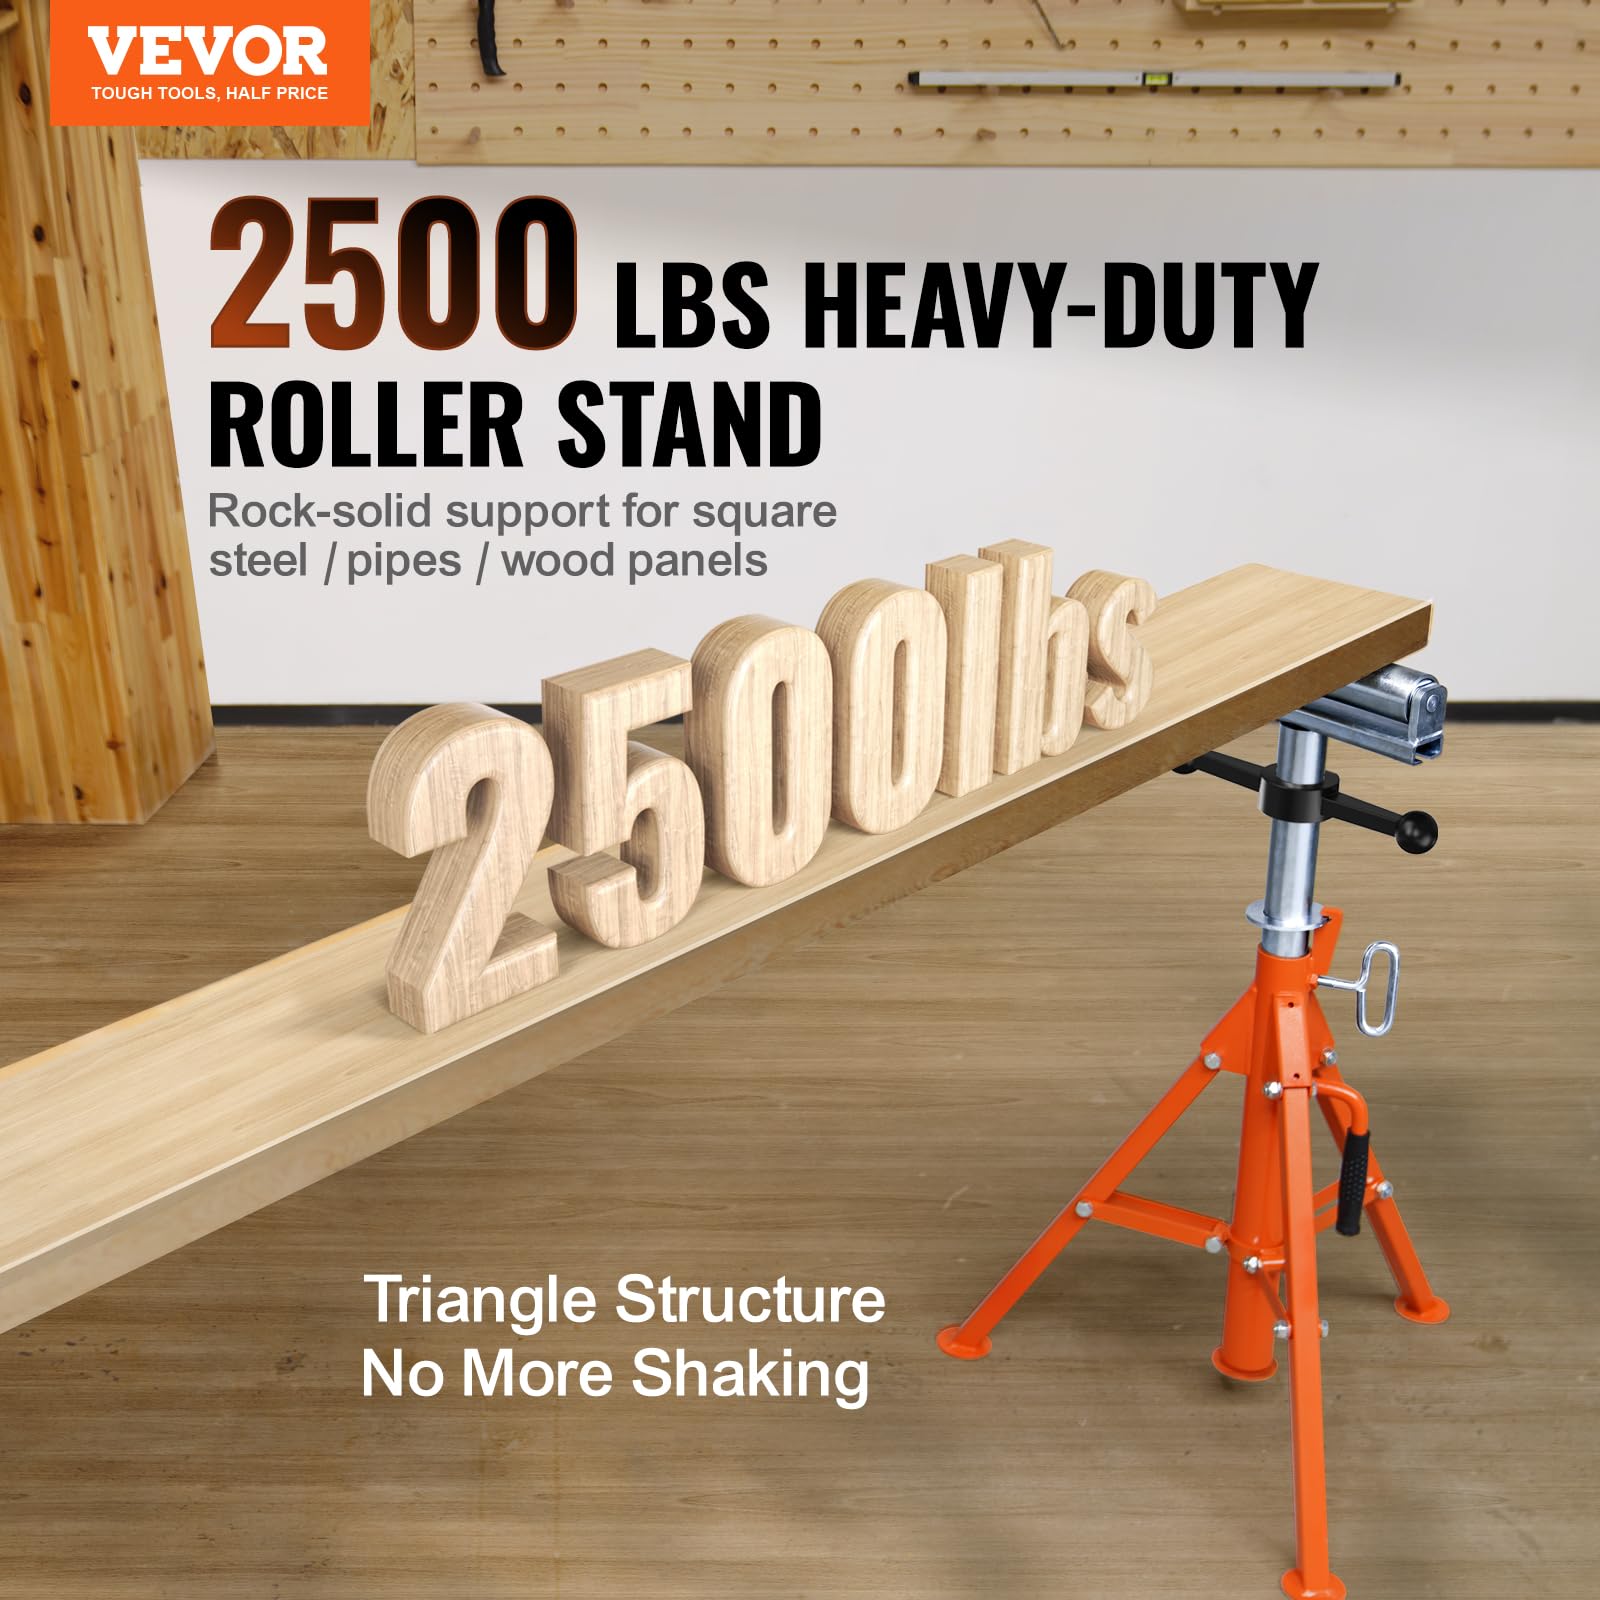 VEVOR Roller Stand, Heavy Duty 2500 LBS Load Capacity Tool Stand - 28